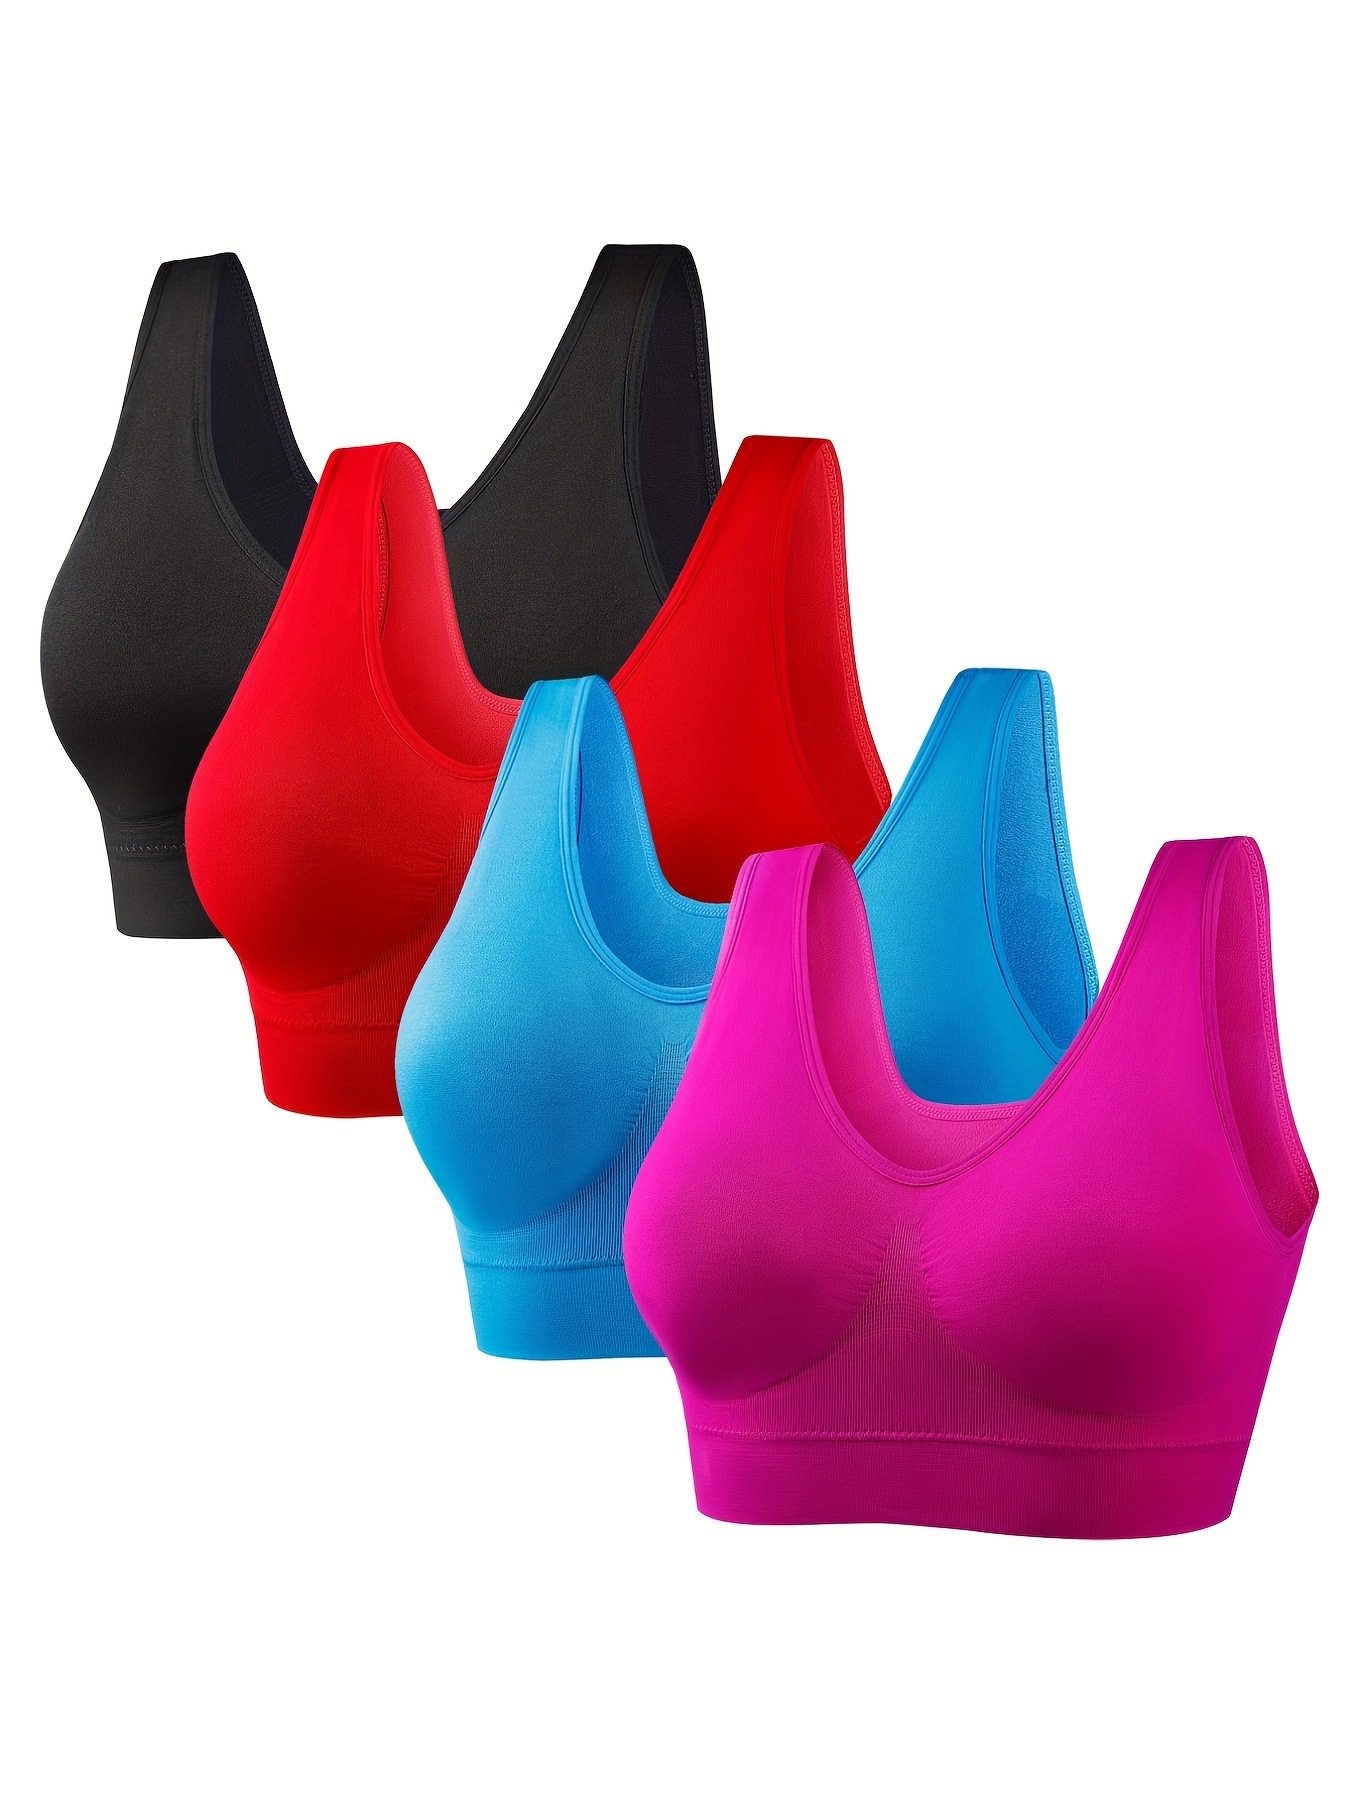 Sale Items Clearance Sports Bra Pack Padded 2PC Women's Front